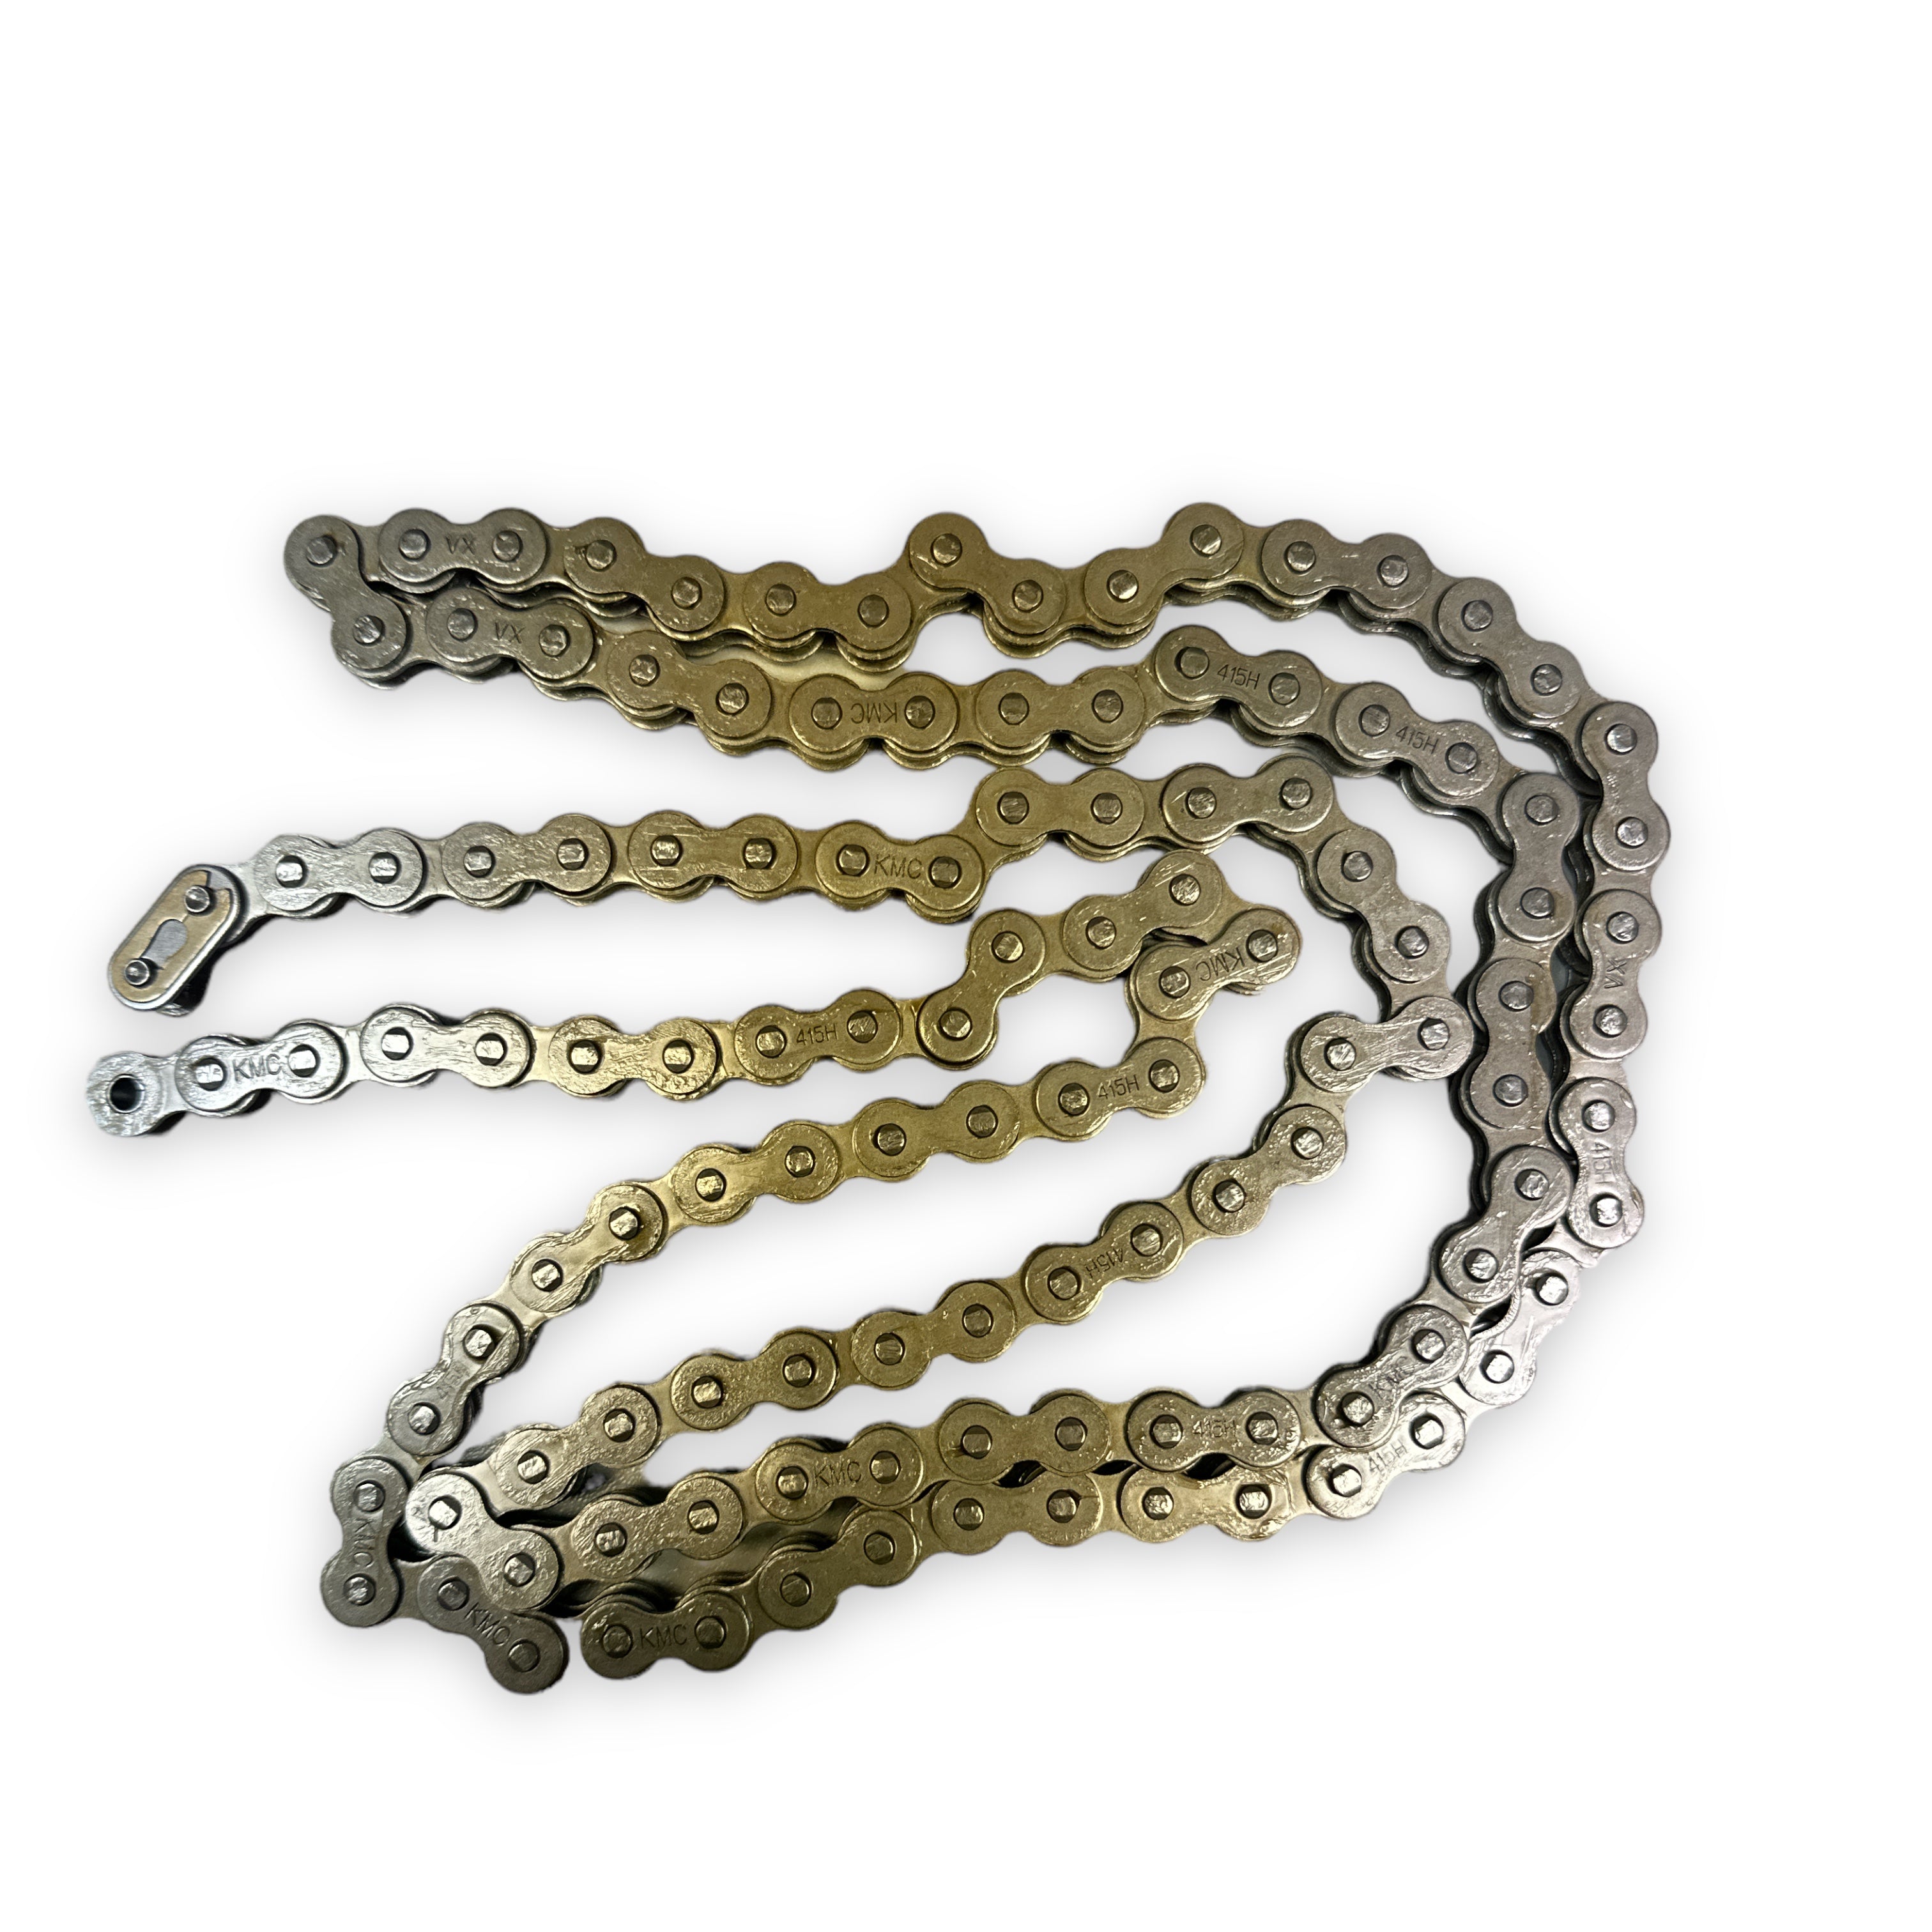 Chain 415H, 120 link, KMC